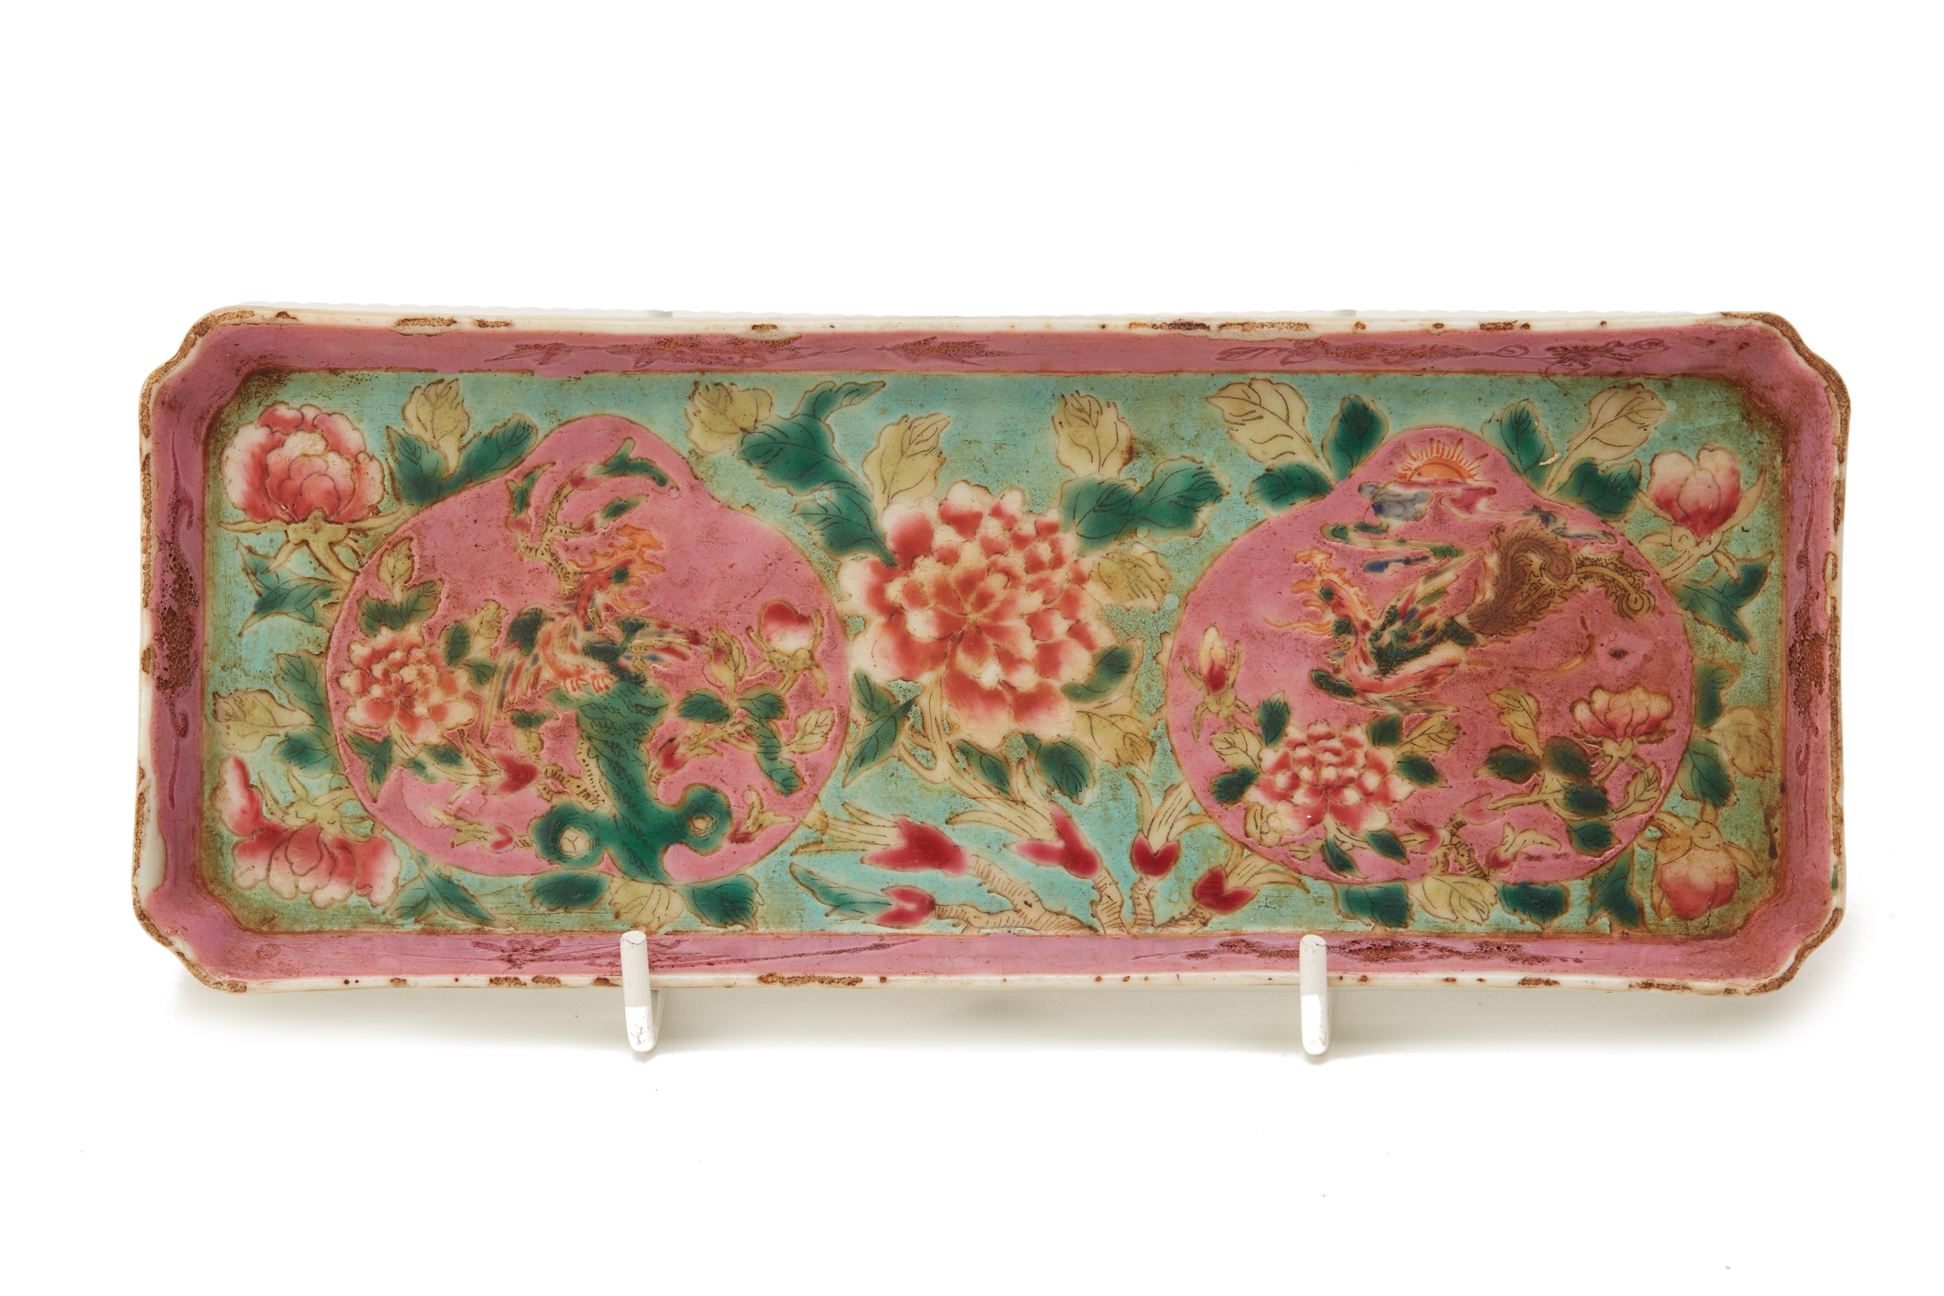 A TURQUOISE GROUND PERANAKAN PORCELAIN TRAY